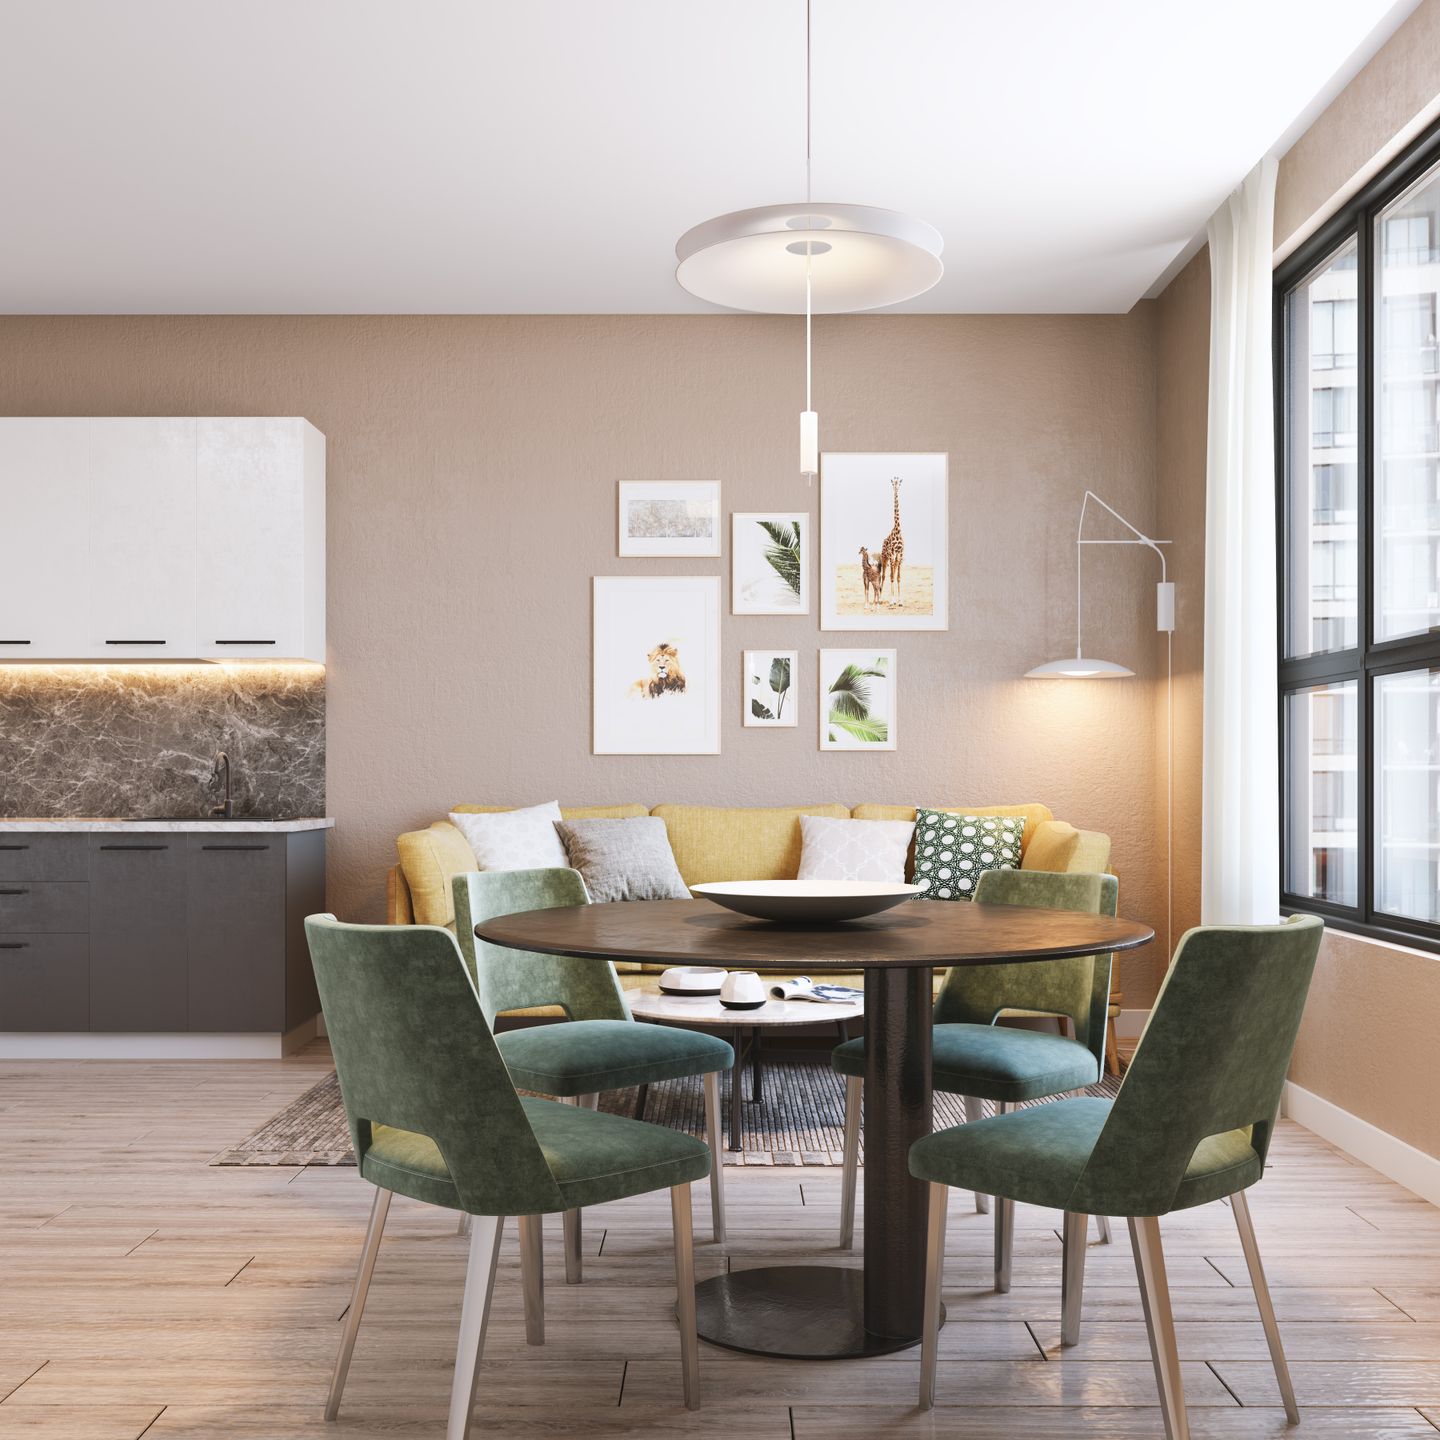 Modern Spacious Dining Room With Yellow-Green Seating - Livspace